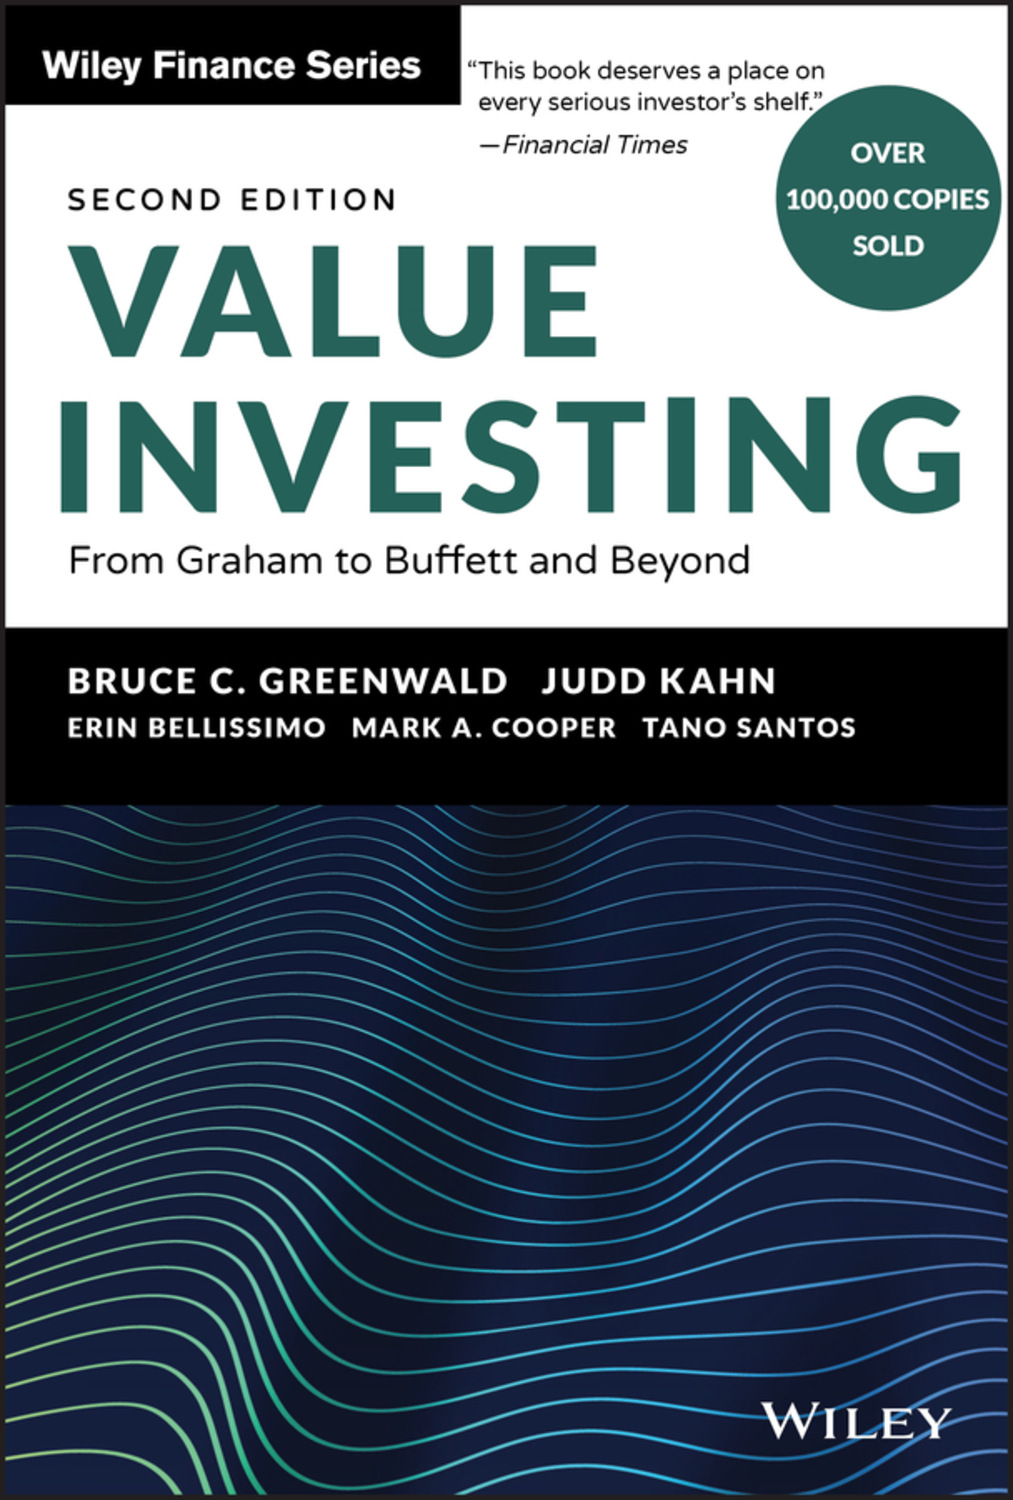 value investing from graham to buffett and beyond ebook pdf elementary